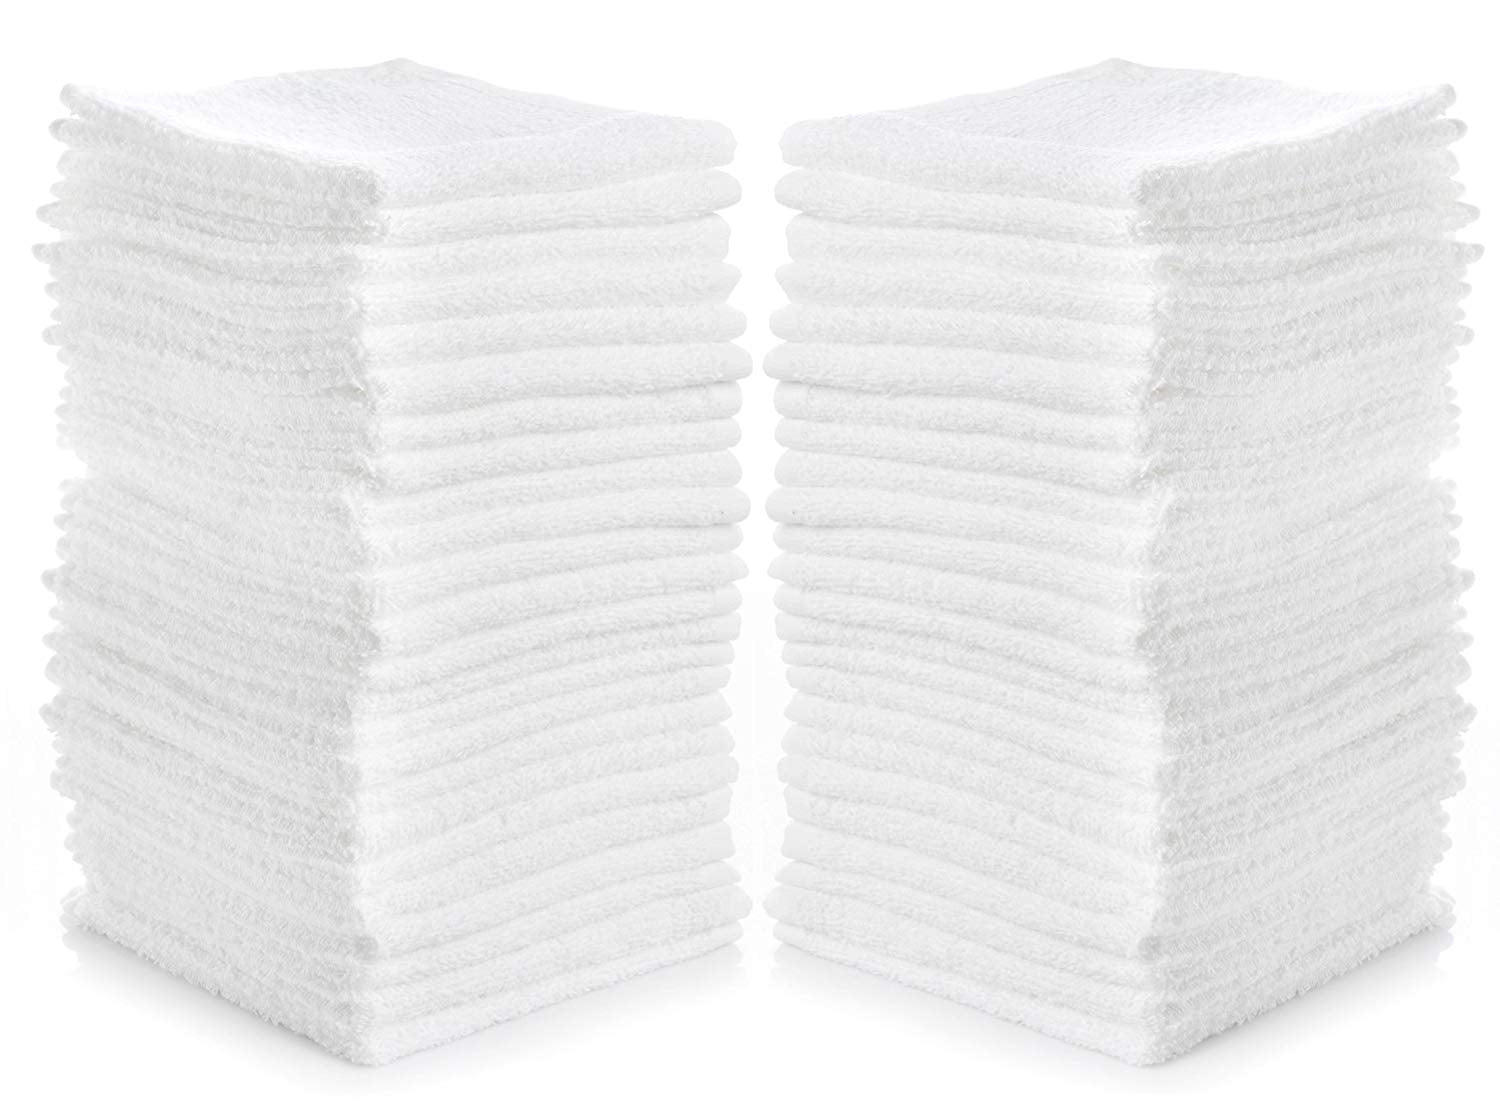 100% Cotton White Washcloths (Pack of 100)